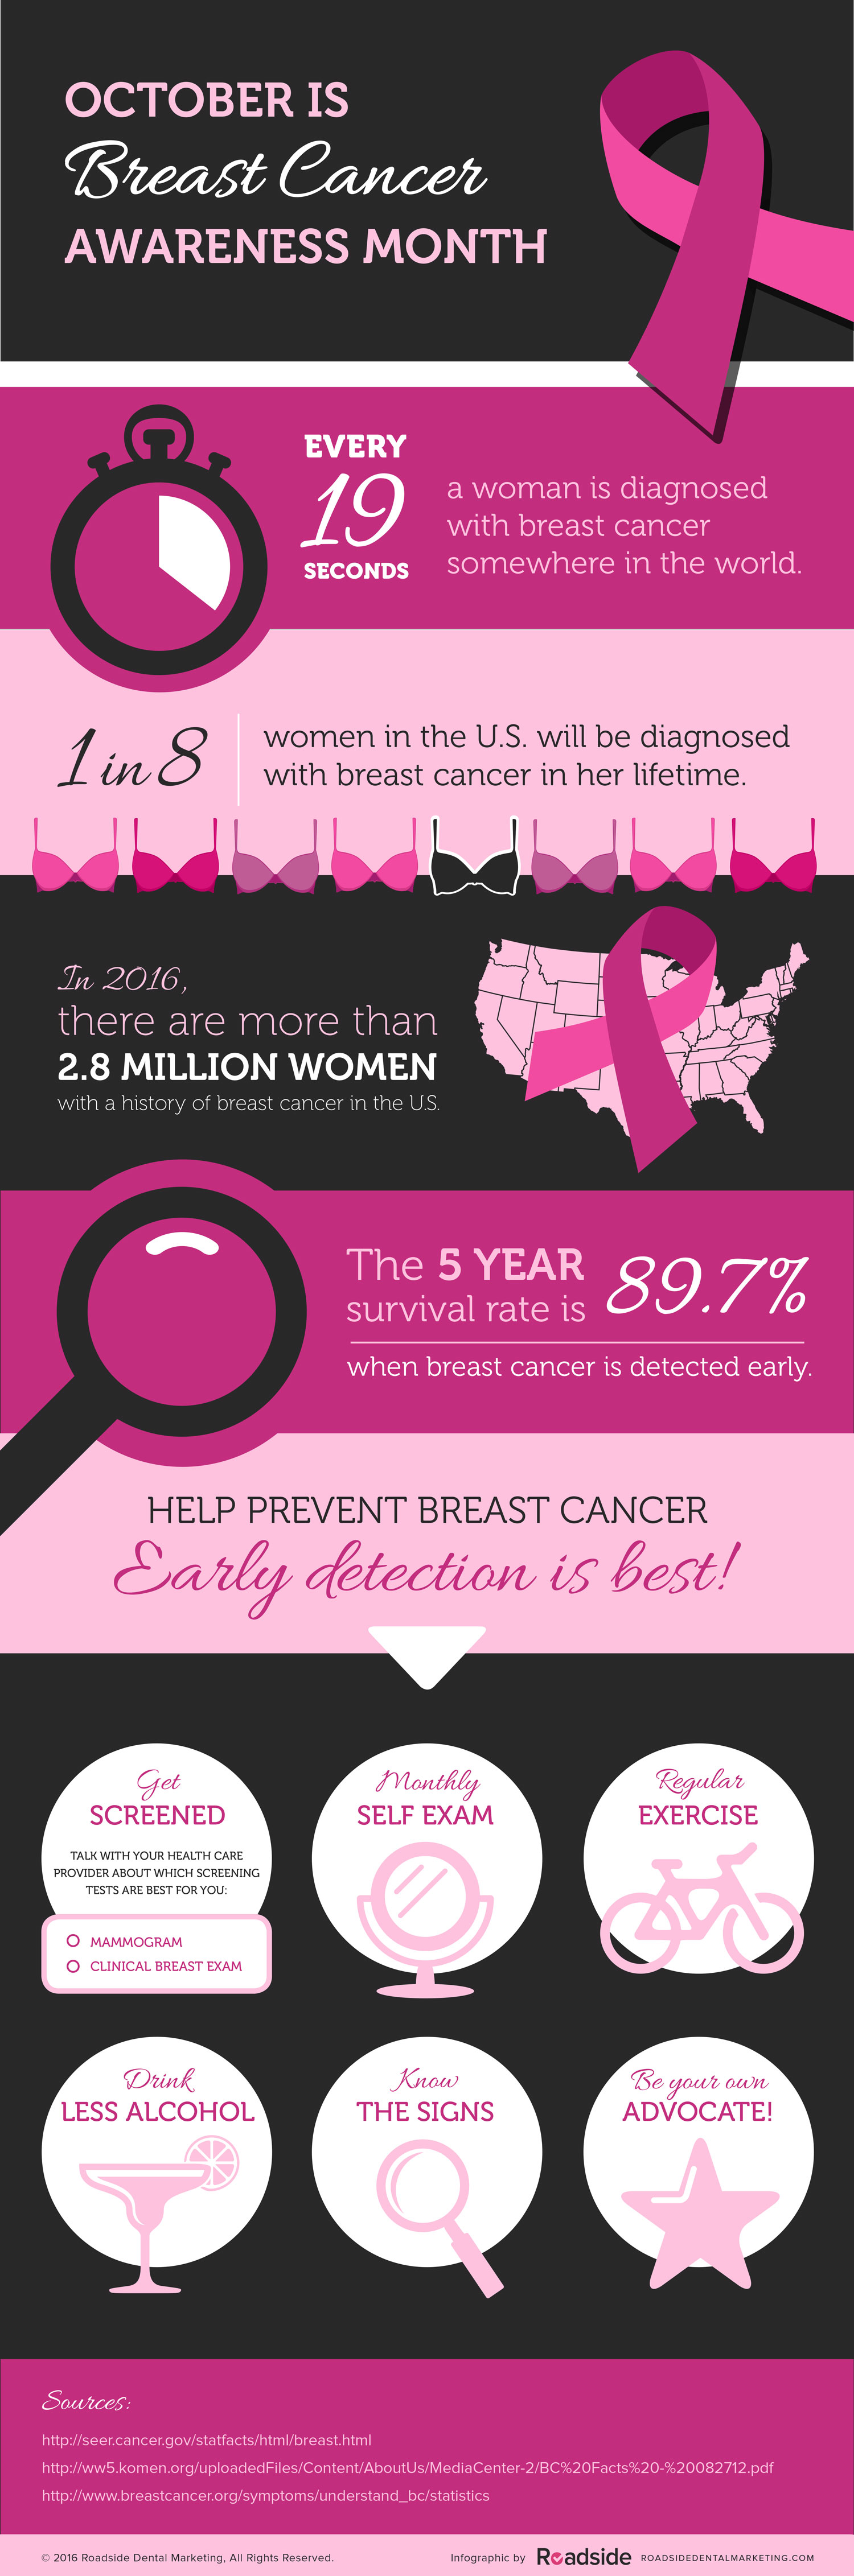 infographic on breast cancer